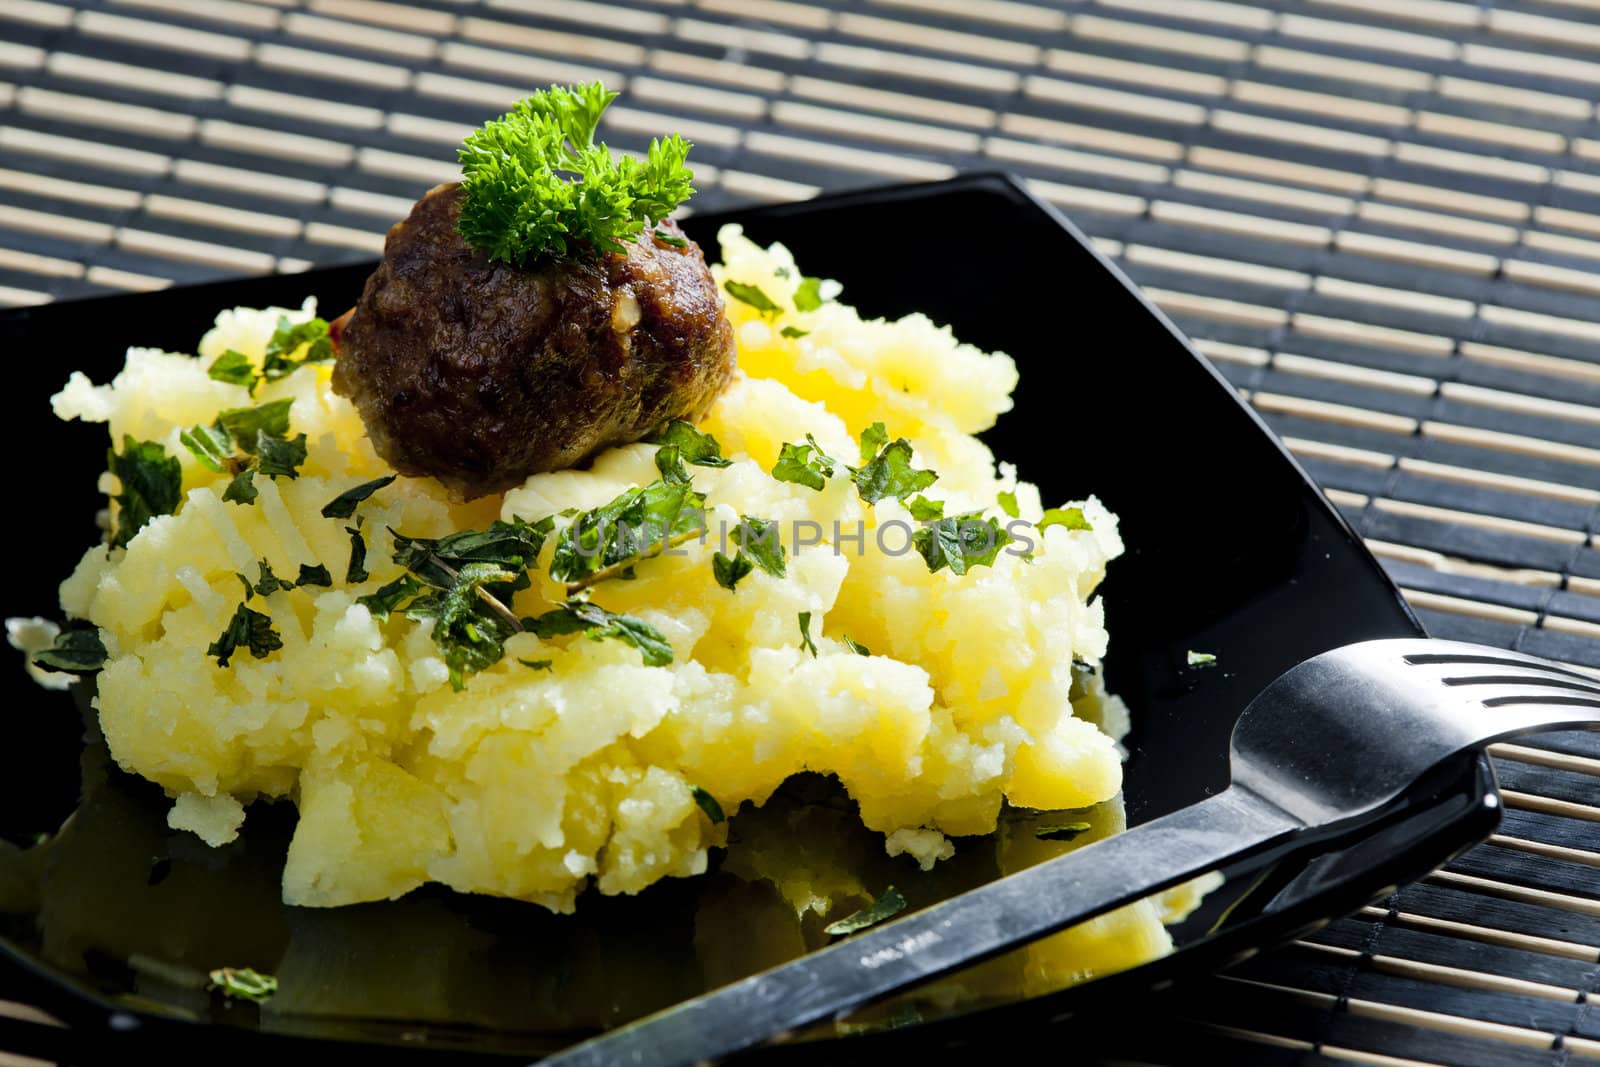 minced meat balls with mashed potatoes by phbcz